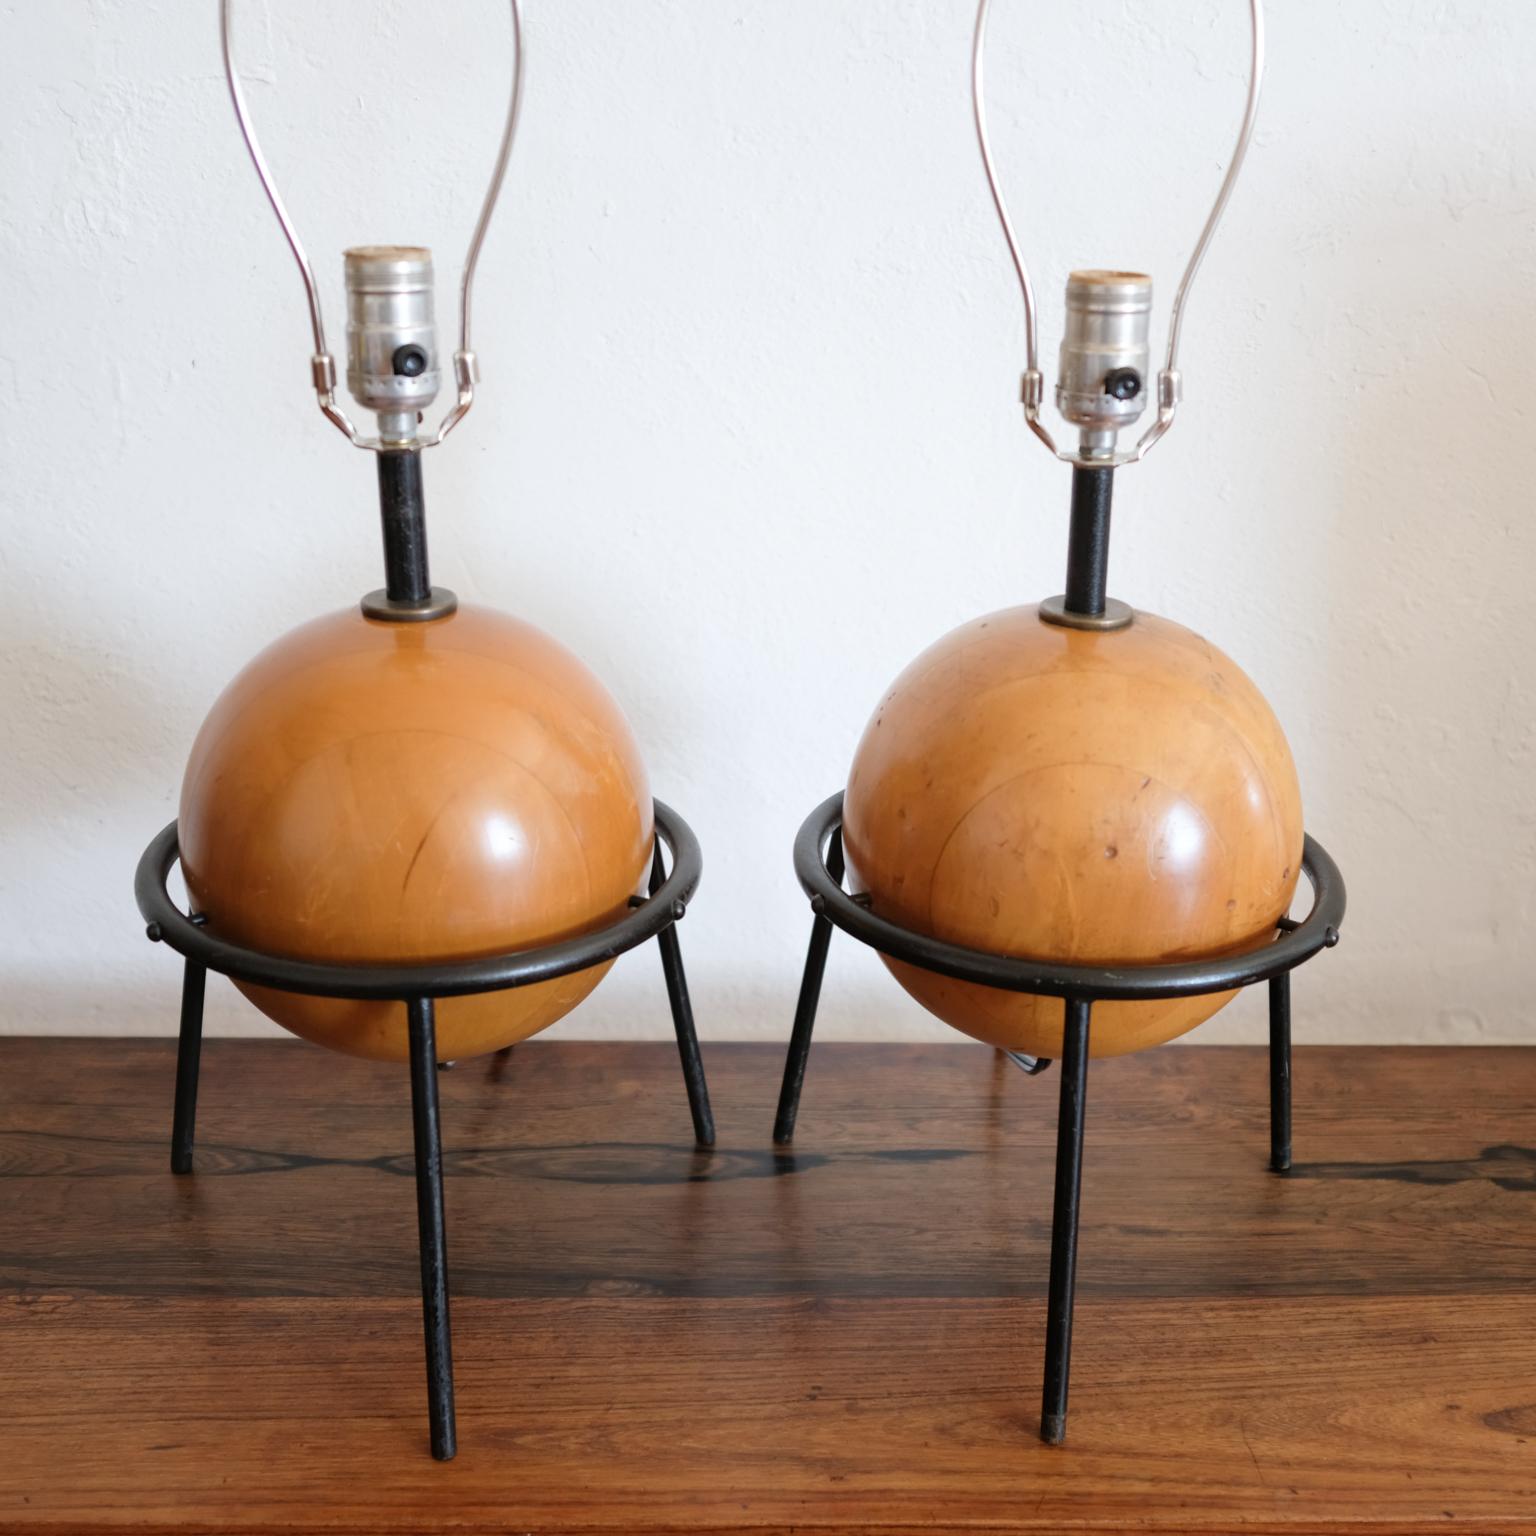 Mid-20th Century California Modern Iron and Wood Lamps by Albert Blake, 1951 For Sale